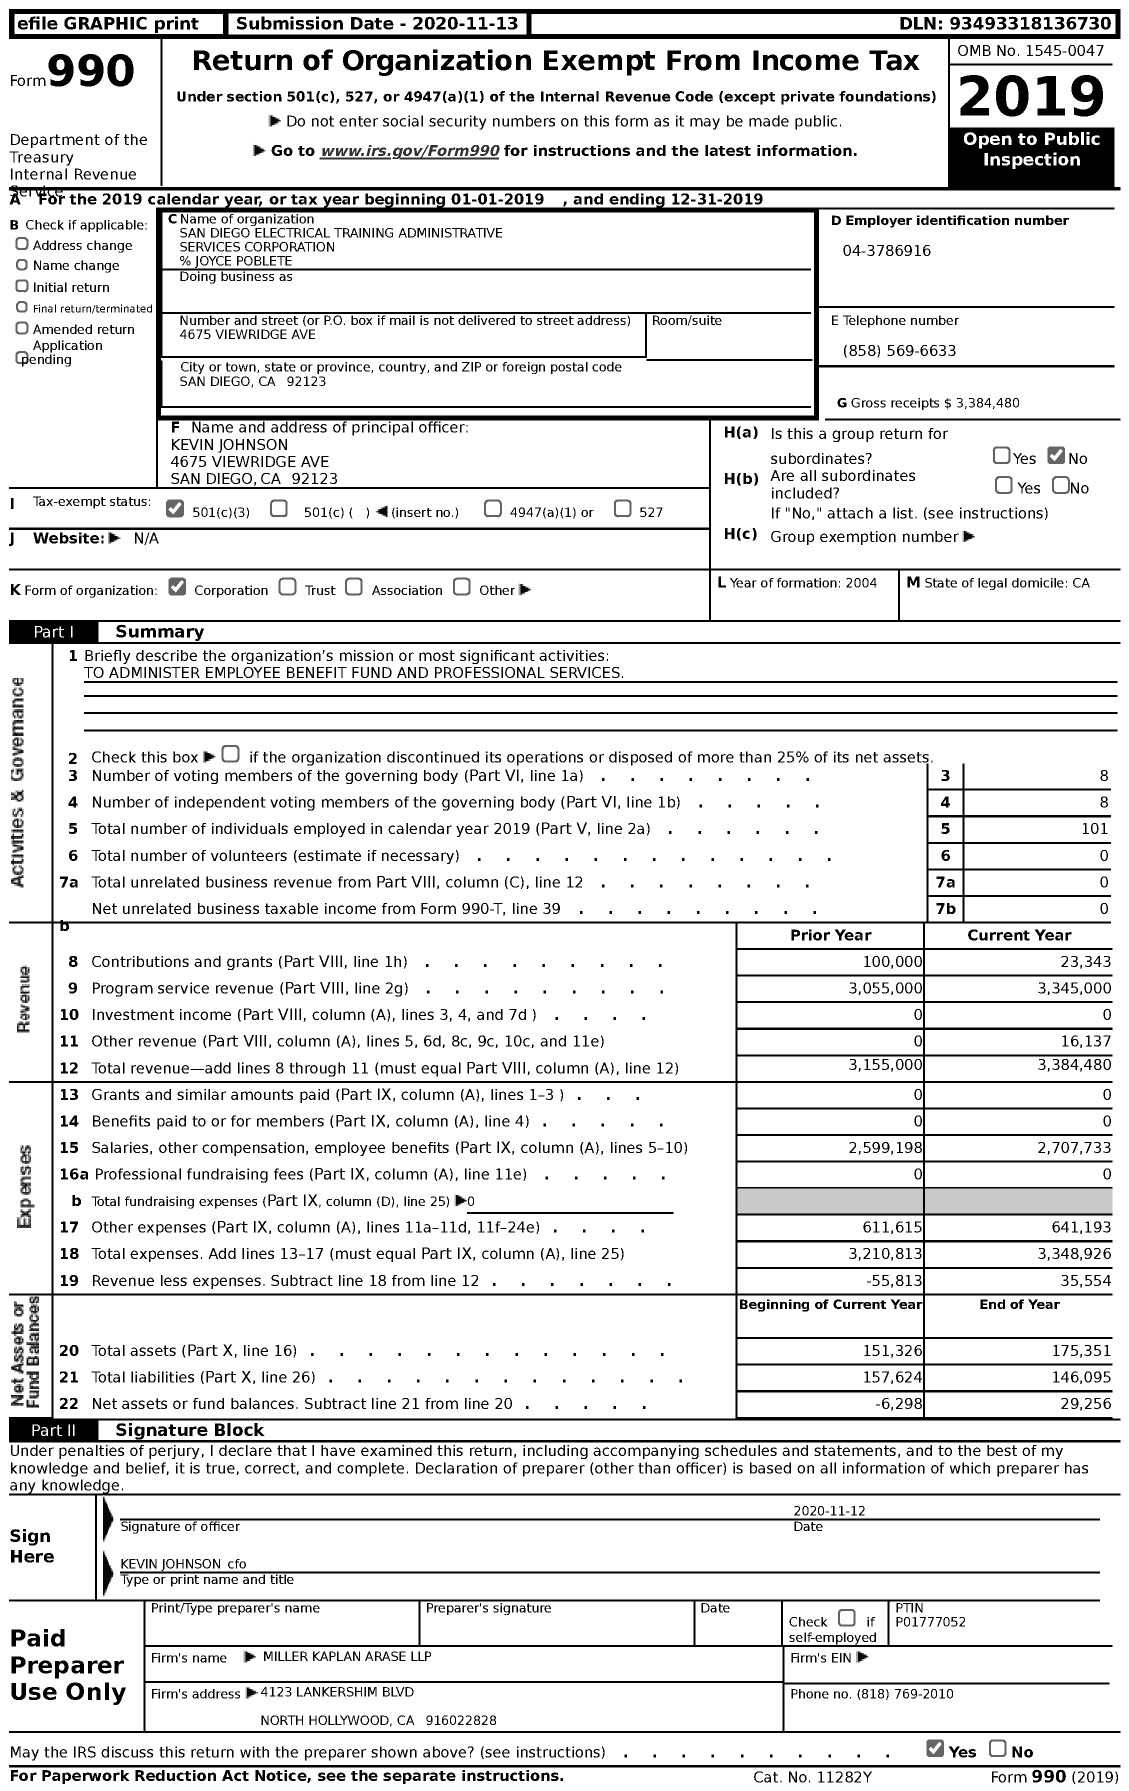 Image of first page of 2019 Form 990 for San Diego Electrical Training Administrative Services Corporation